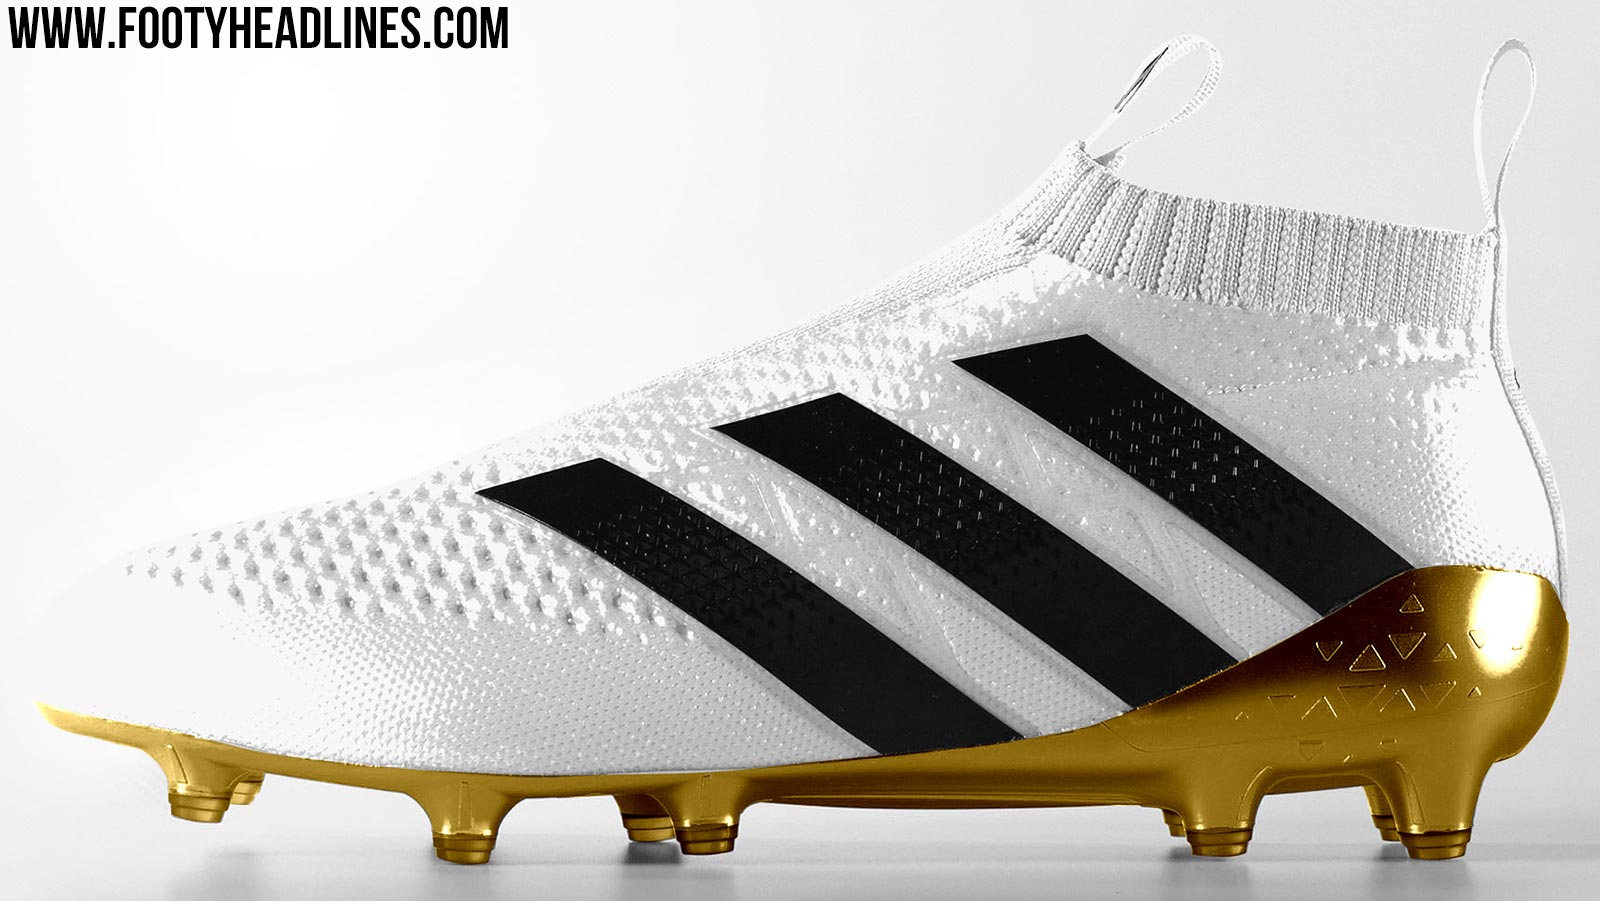 10 Adidas Ace 16+ PureControl Colorway Concepts - Footy Headlines